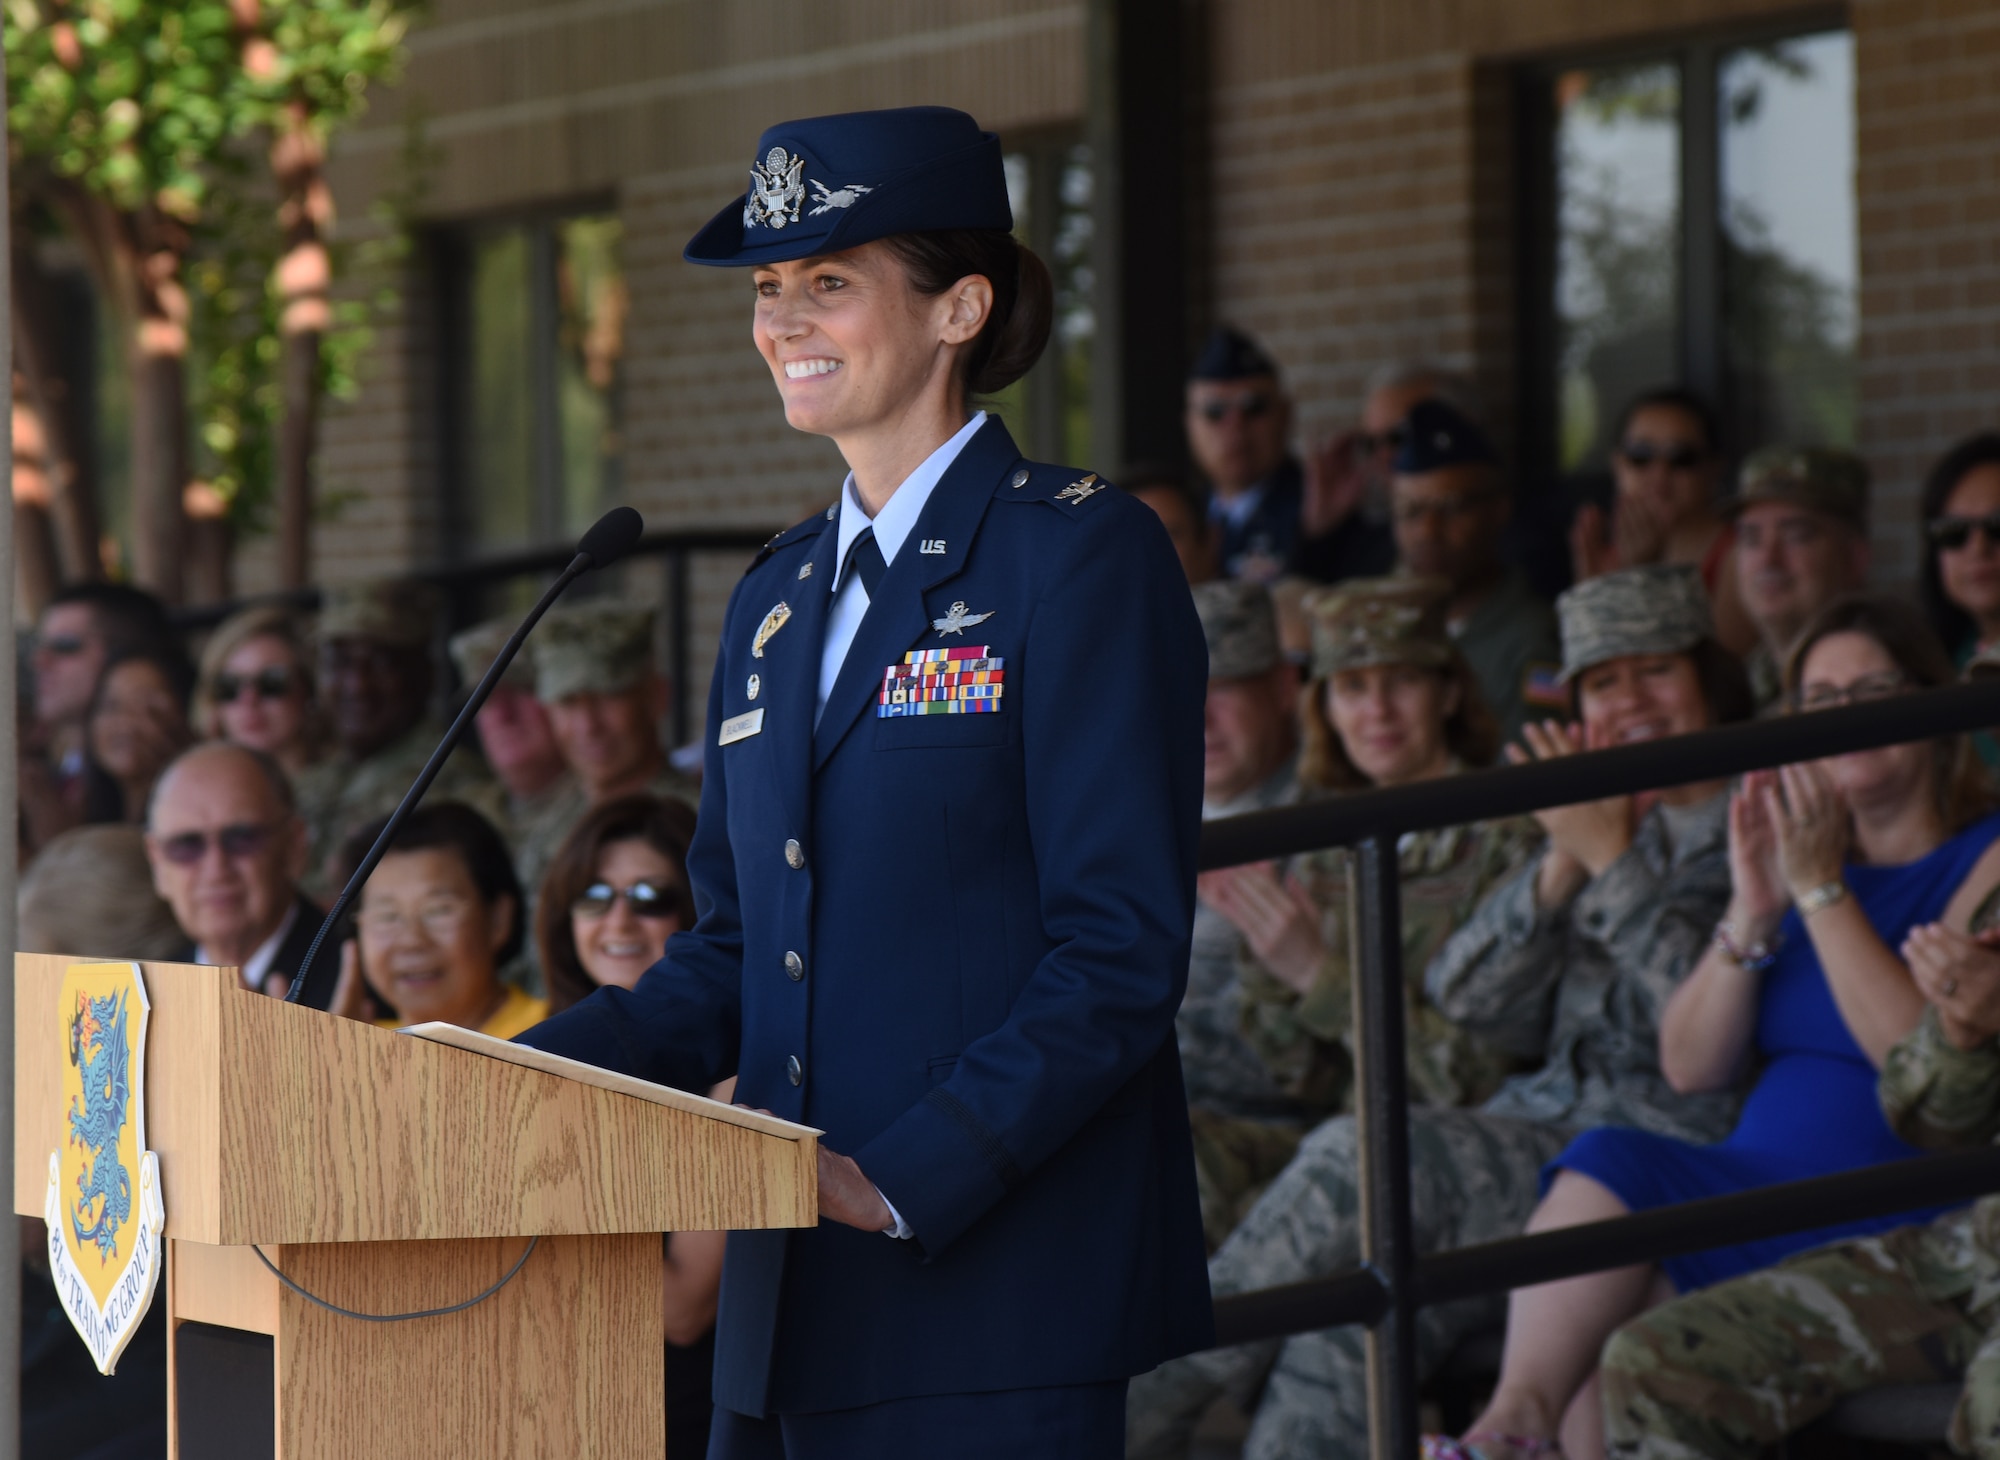 U.S. Air Force Col. Heather Blackwell, 81st Training Wing commander, addresses her new command during a change of command ceremony on the Levitow Training Support Facility drill pad at Keesler Air Force Base, Mississippi, May 16, 2019. Blackwell assumed command from Col. Debra Lovette. (U.S. Air Force photo by Kemberly Groue)